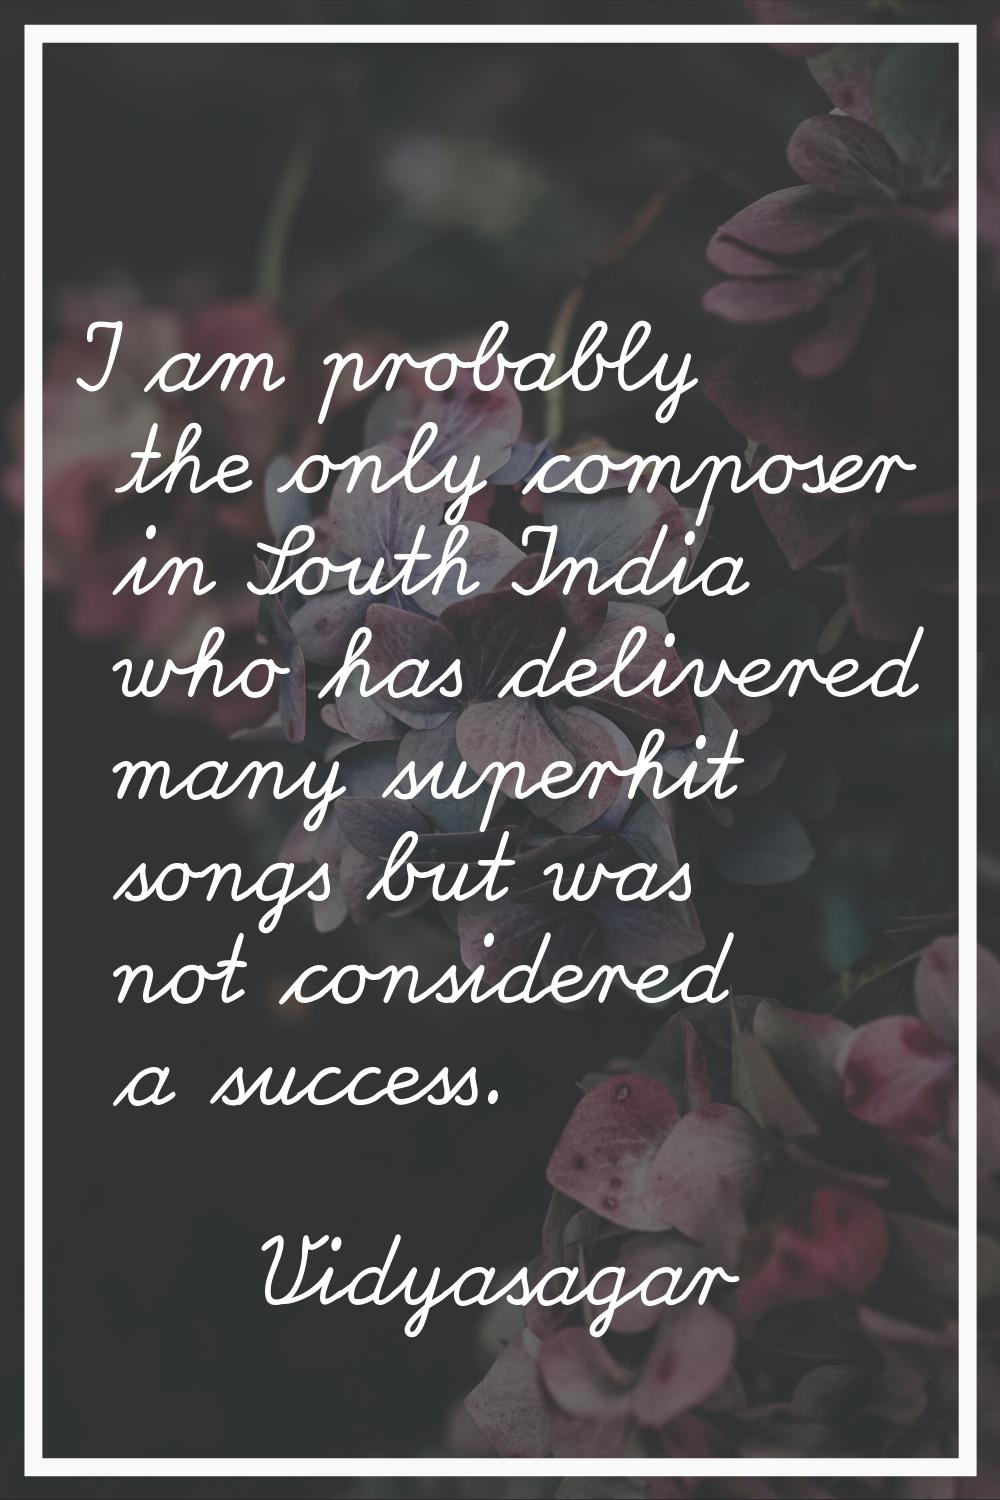 I am probably the only composer in South India who has delivered many superhit songs but was not co